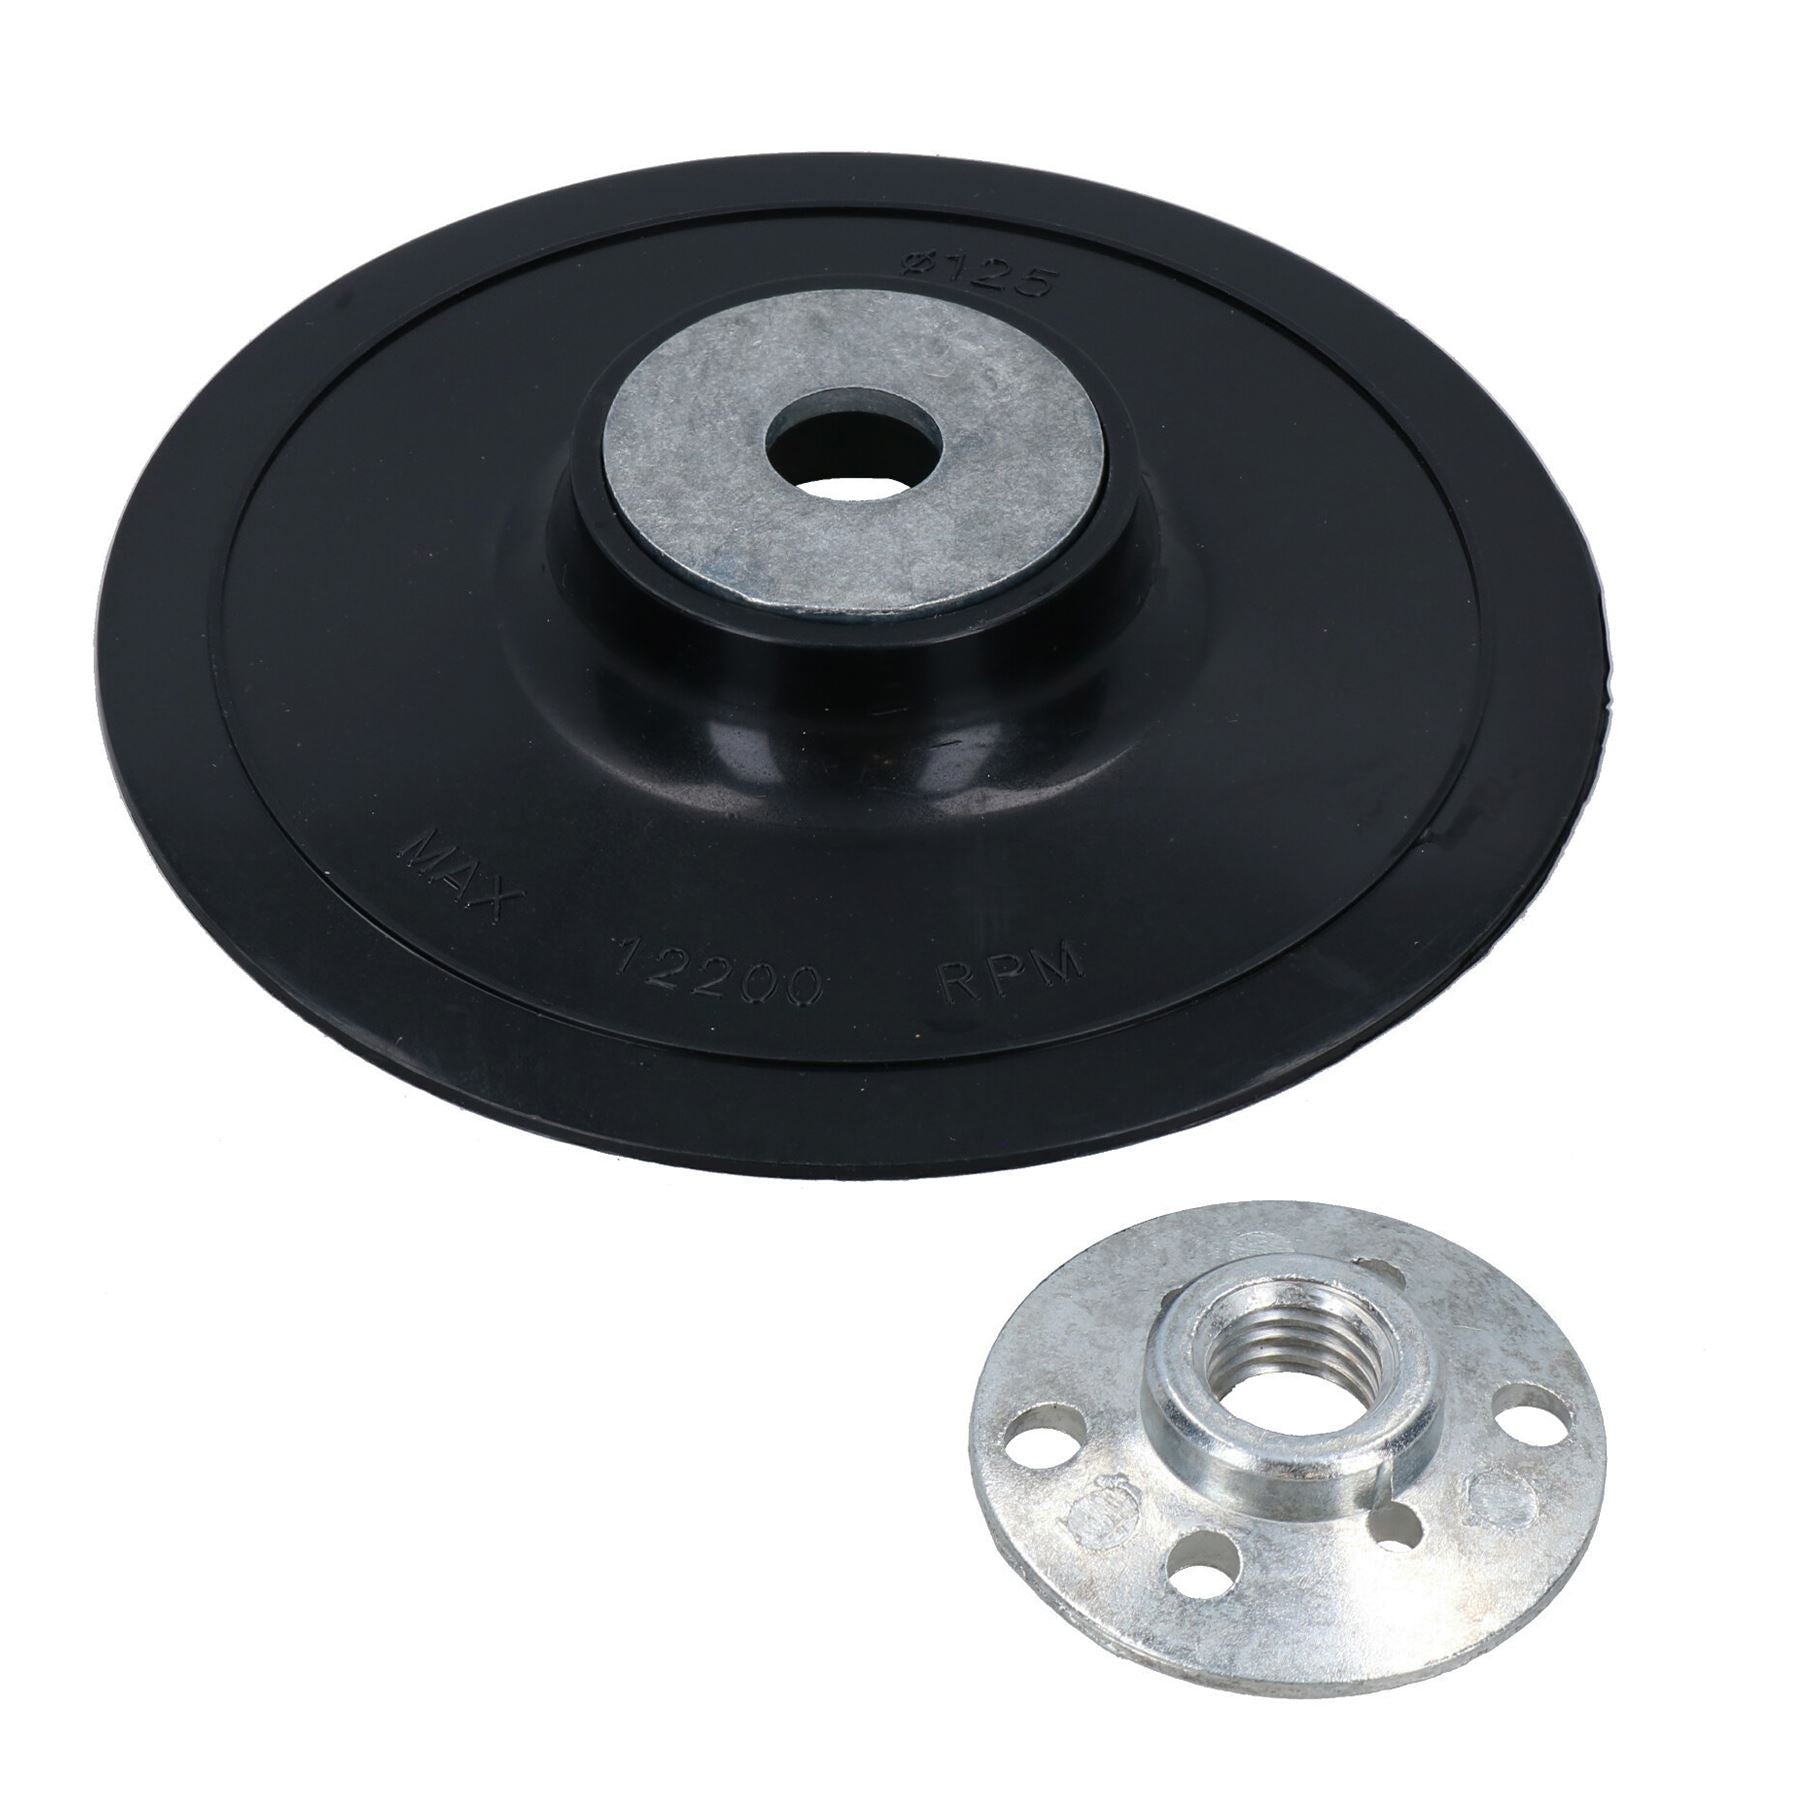 125mm ABS Fibre Disc Backing Rubber Pad With M14 Thread For Angle Grinders